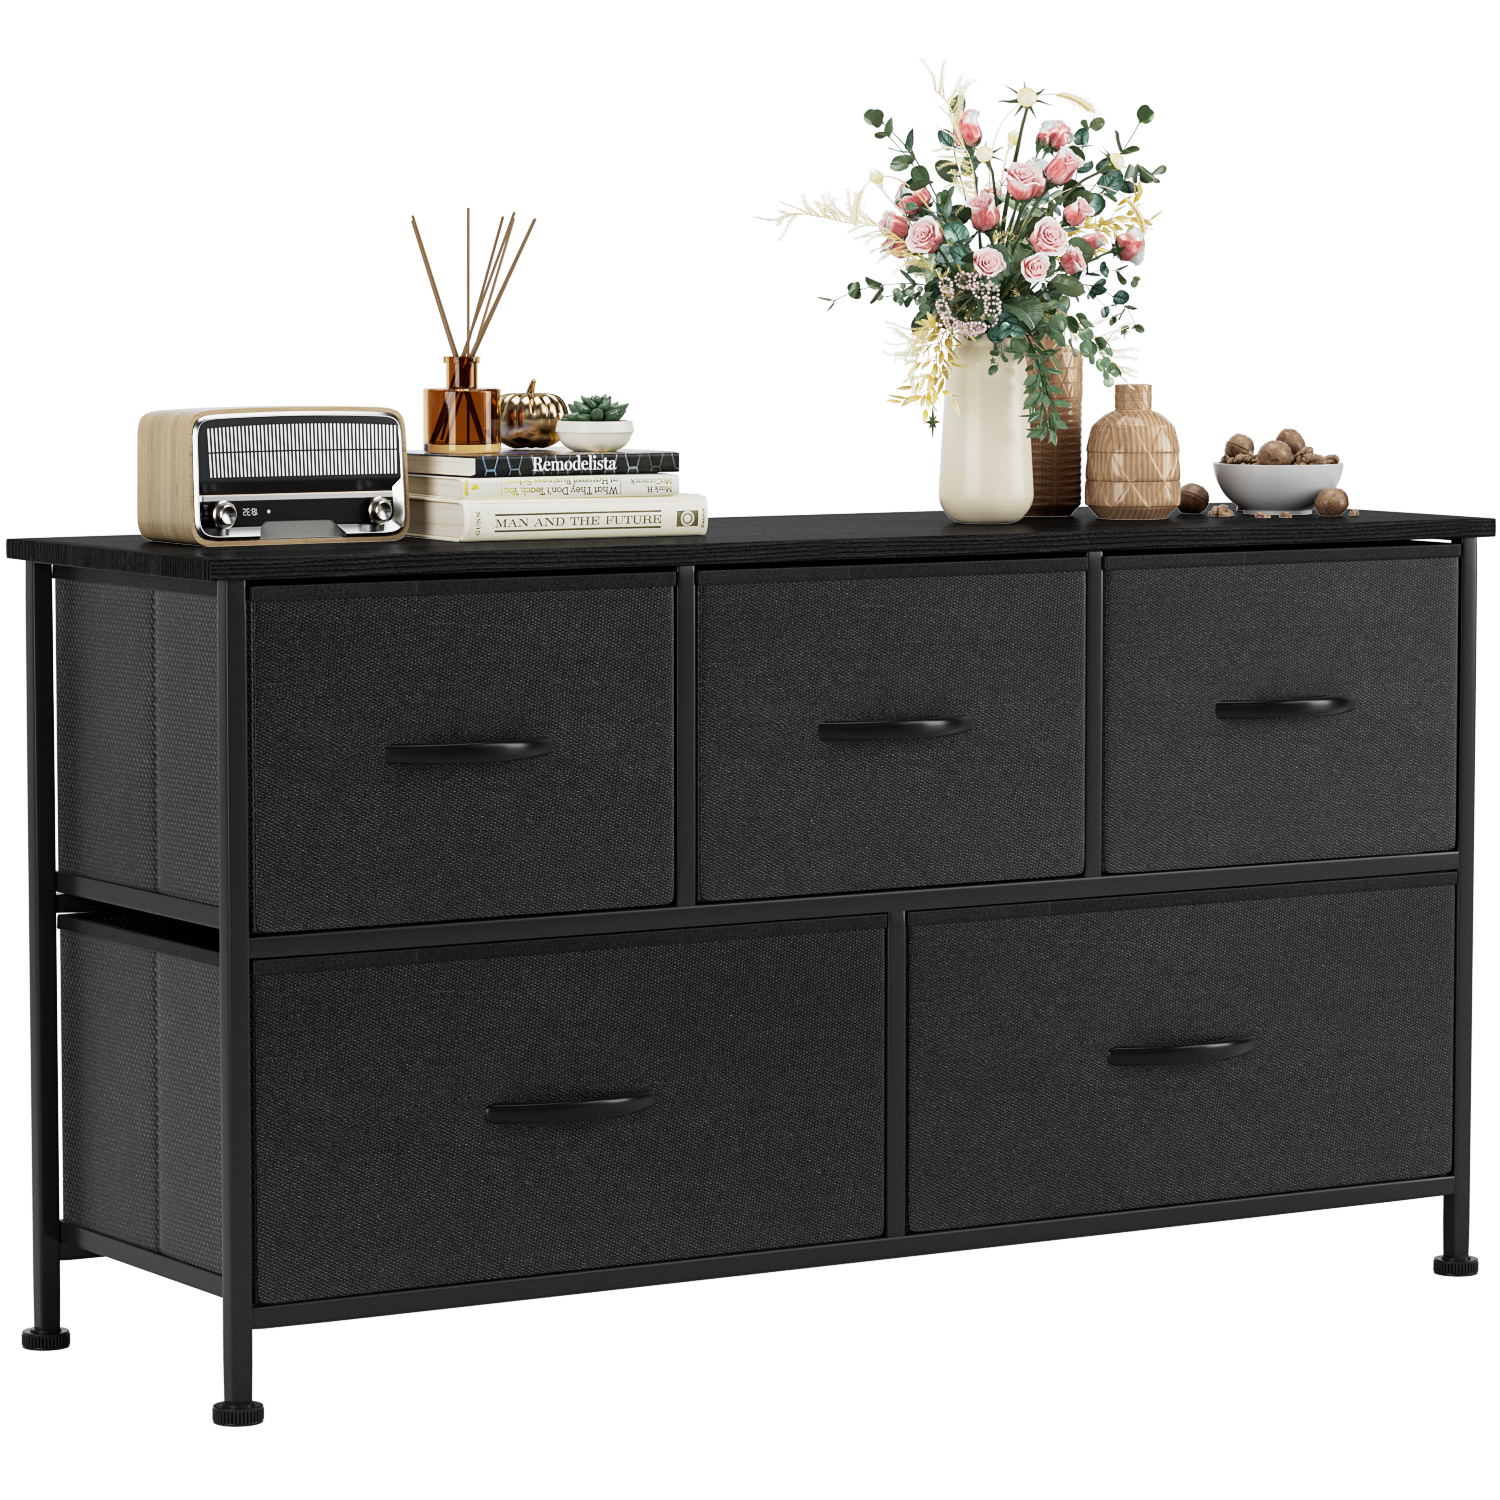 Vineego Dresser for Bedroom with 5 Drawers, Wide Chest of Drawers, Fabric Dresser,Black - image 3 of 7